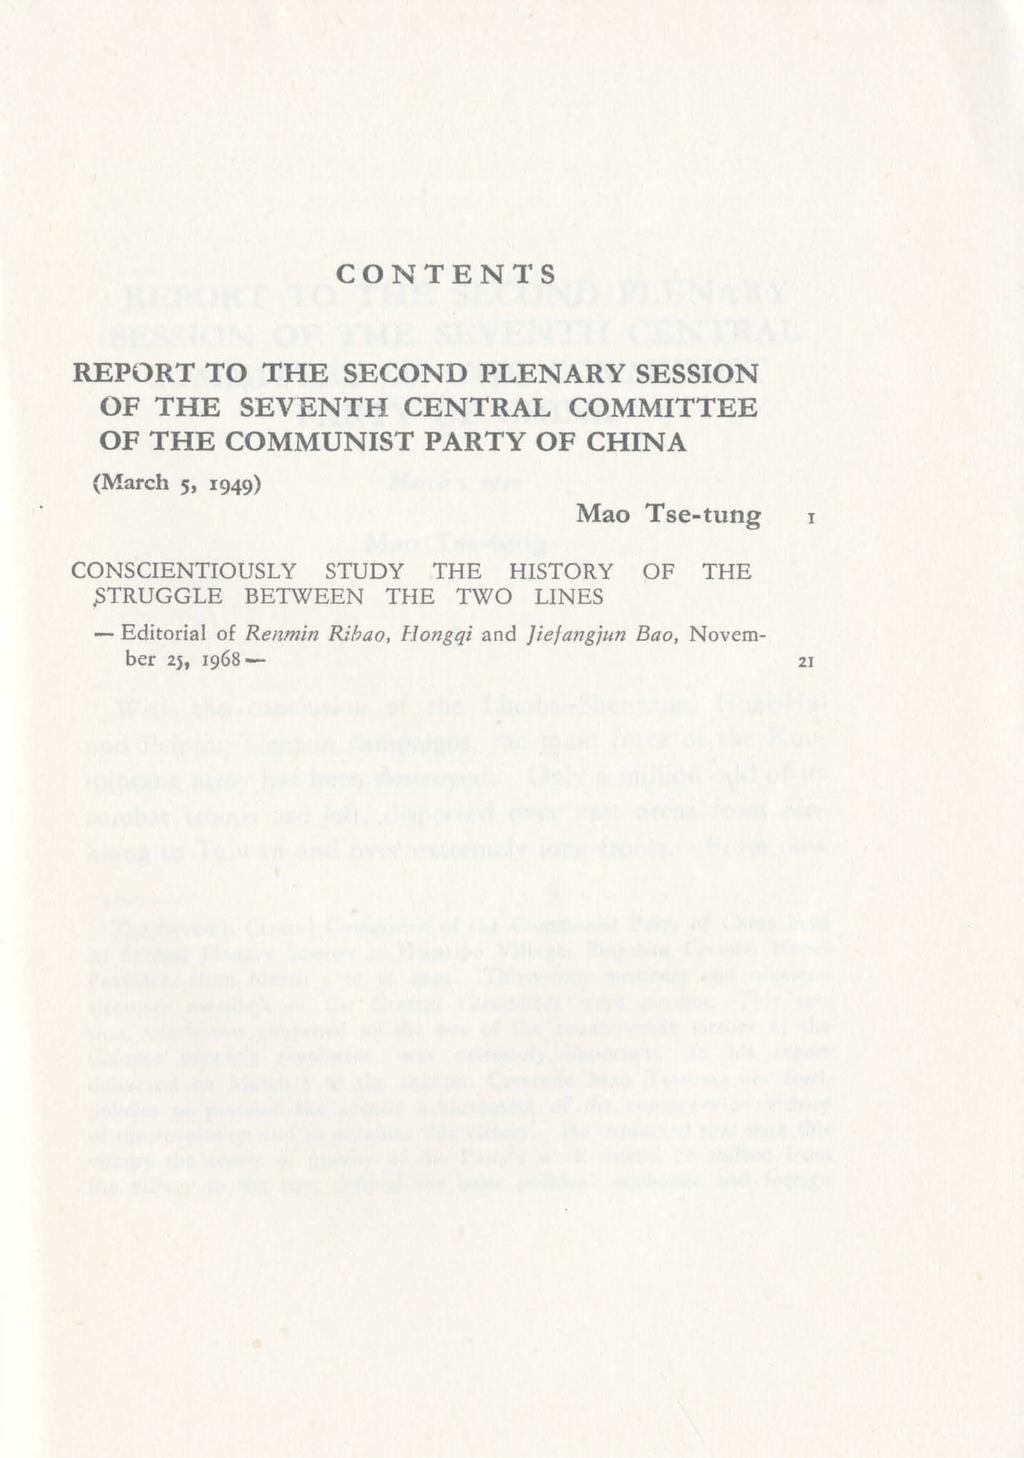 CONTENTS REPORT TO THE SECOND PLENARY SESSION OF THE SEVENTH CENTRAL COMMITTEE OF THE COMMUNIST PARTY OF CHINA (March 5, 1949) Mao Tse-tung CO